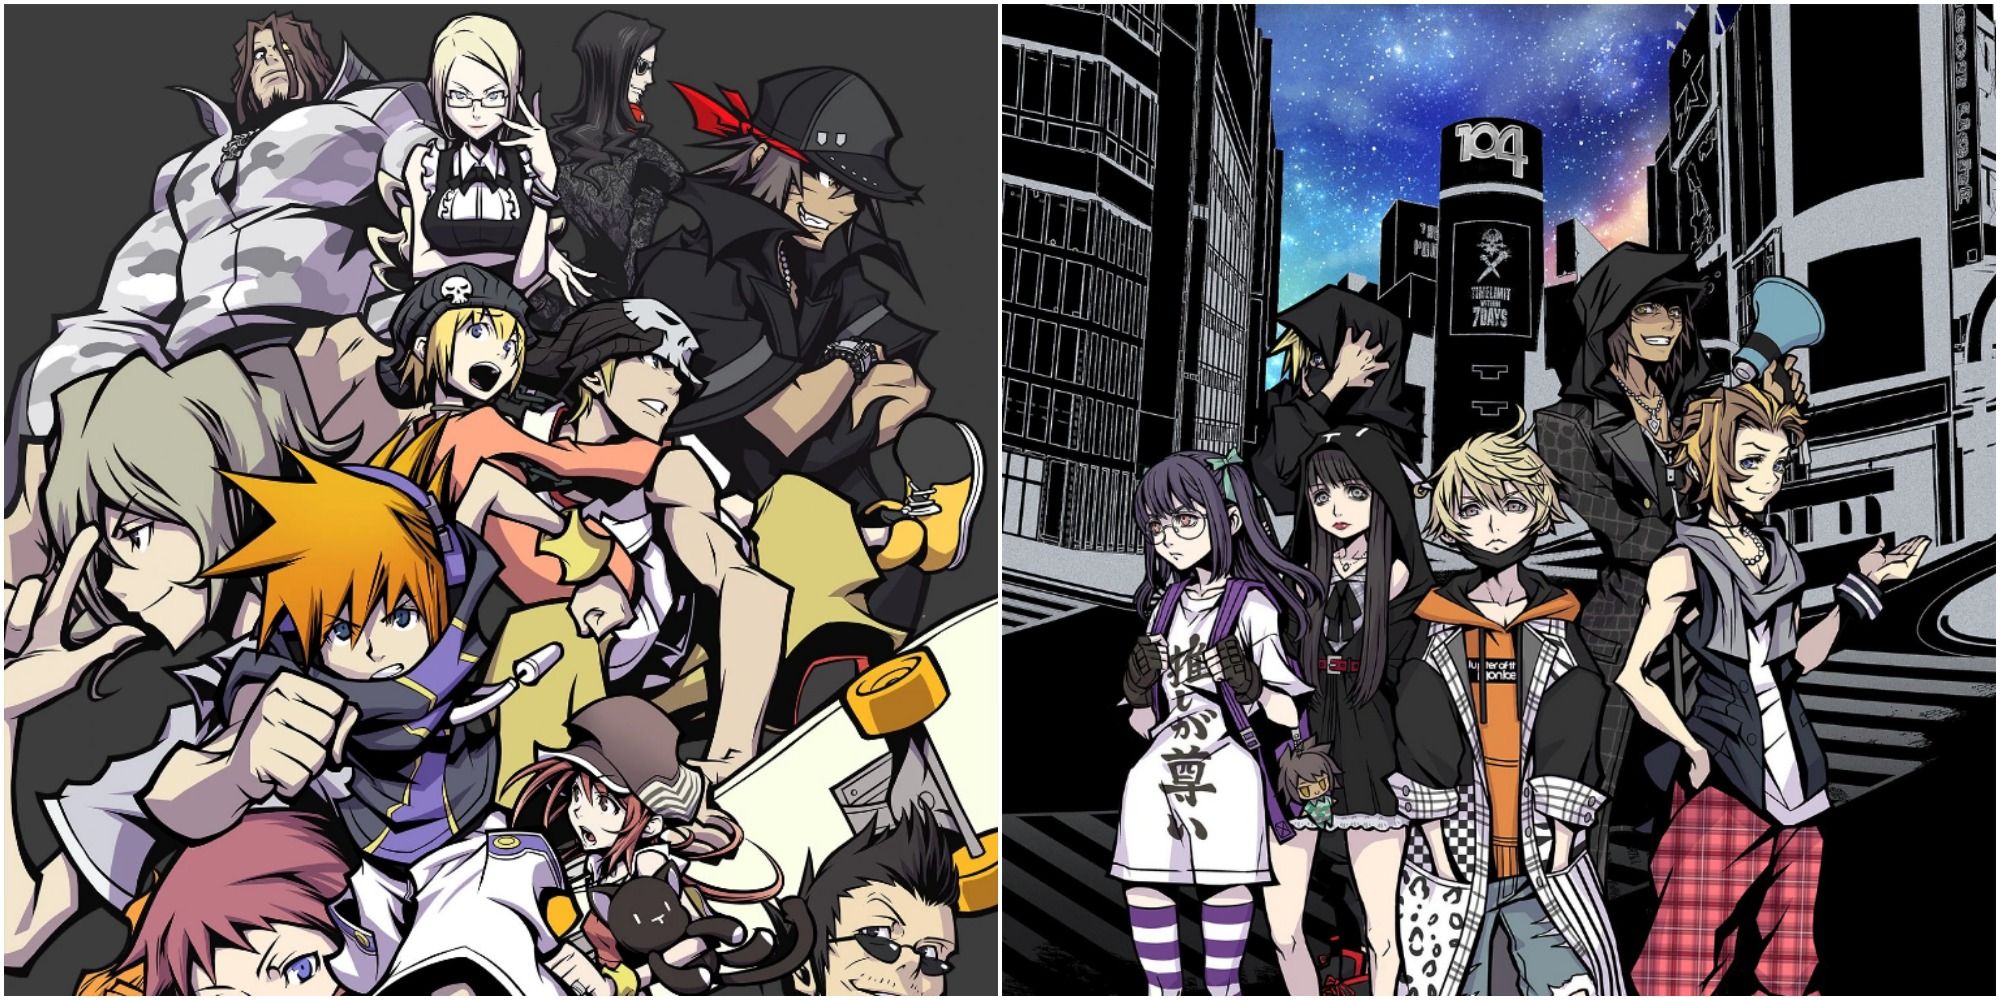 Here's why you should care about 'The World Ends With You